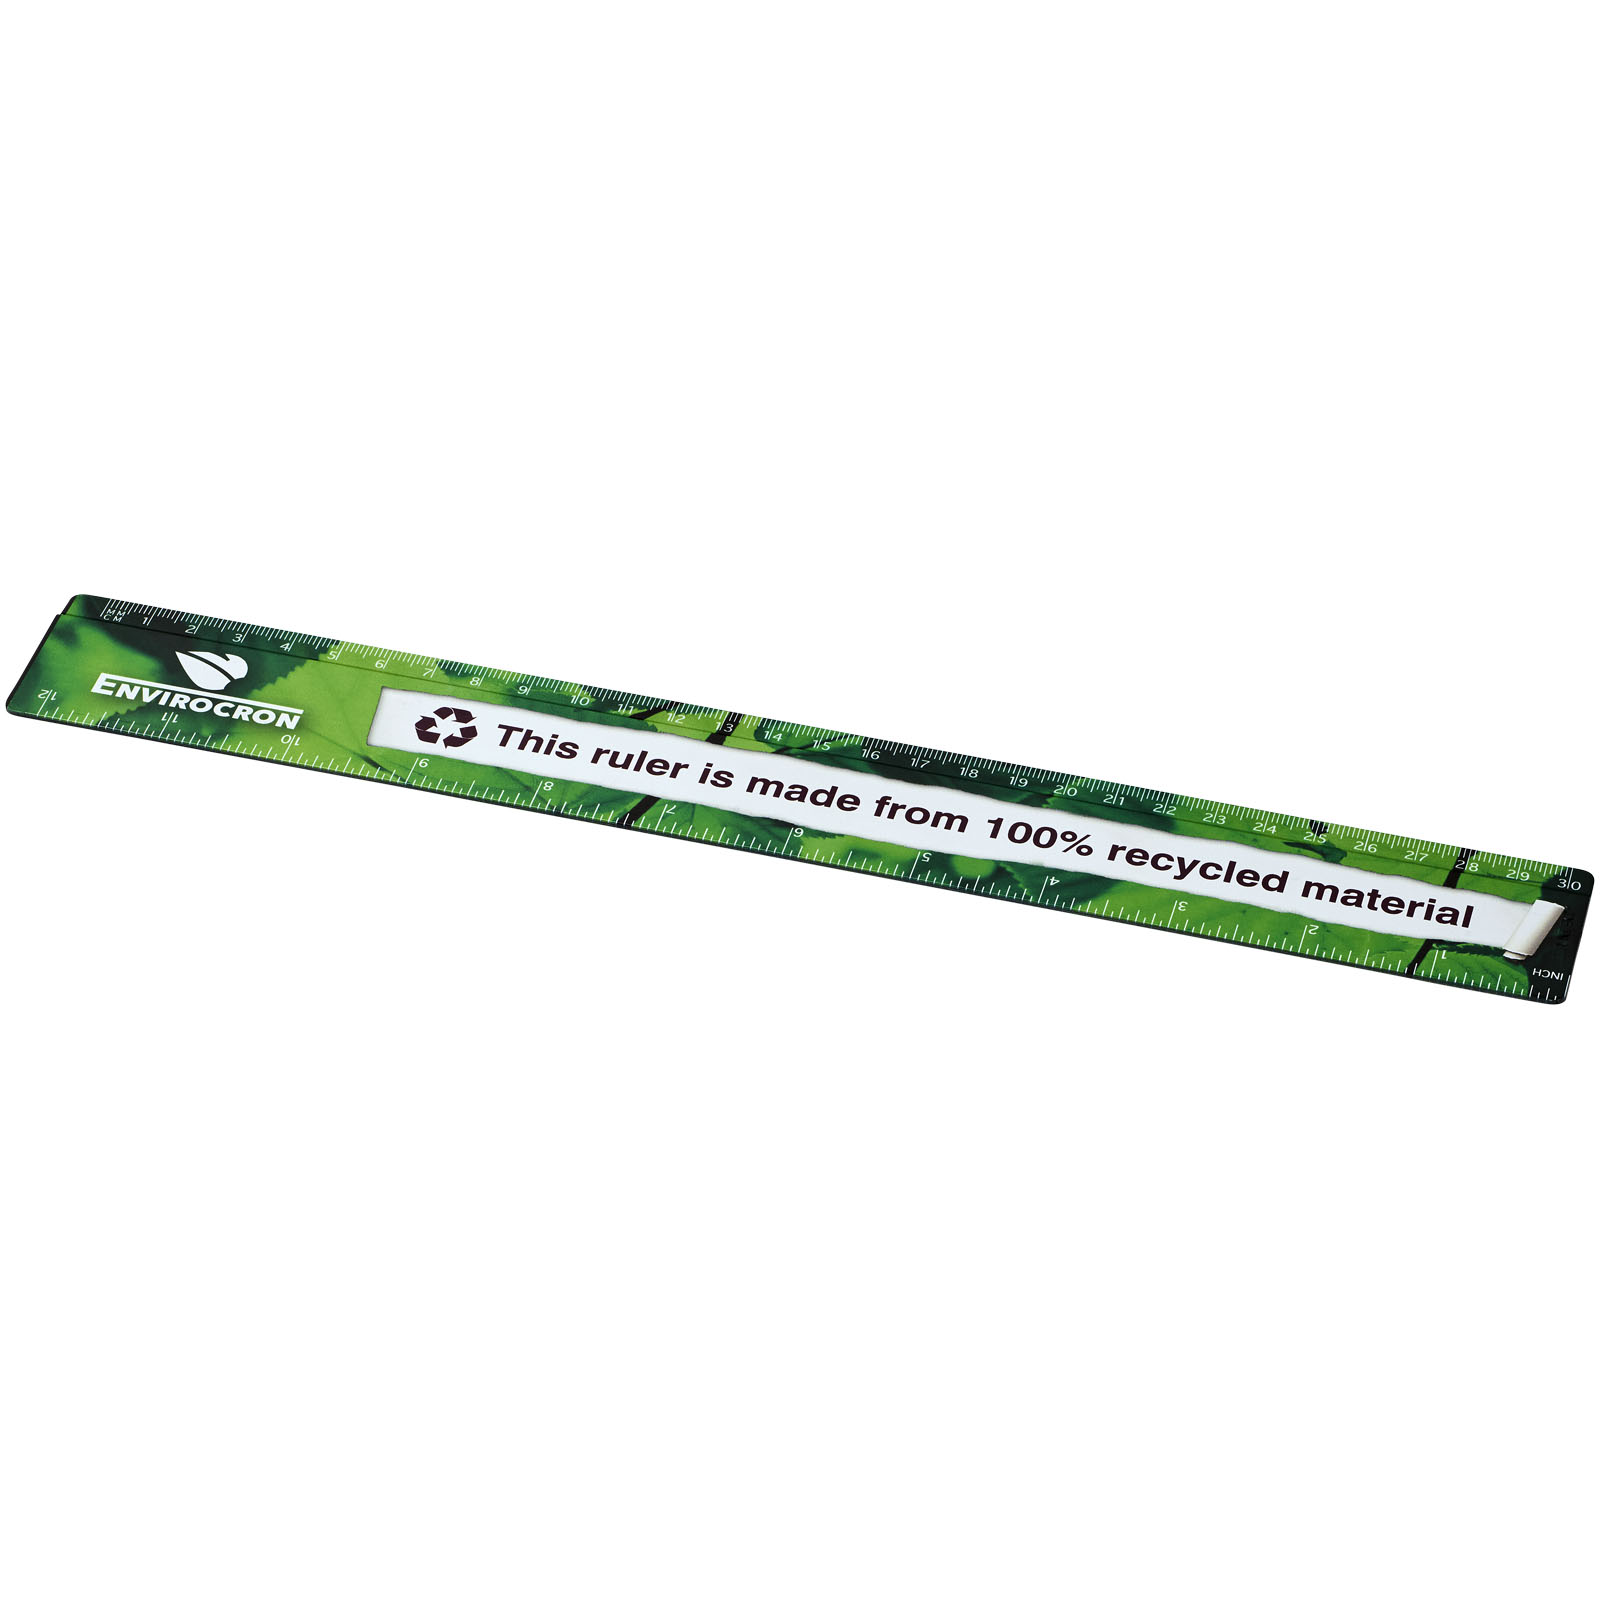 Notebooks & Desk Essentials - Terran 30 cm ruler from 100% recycled plastic